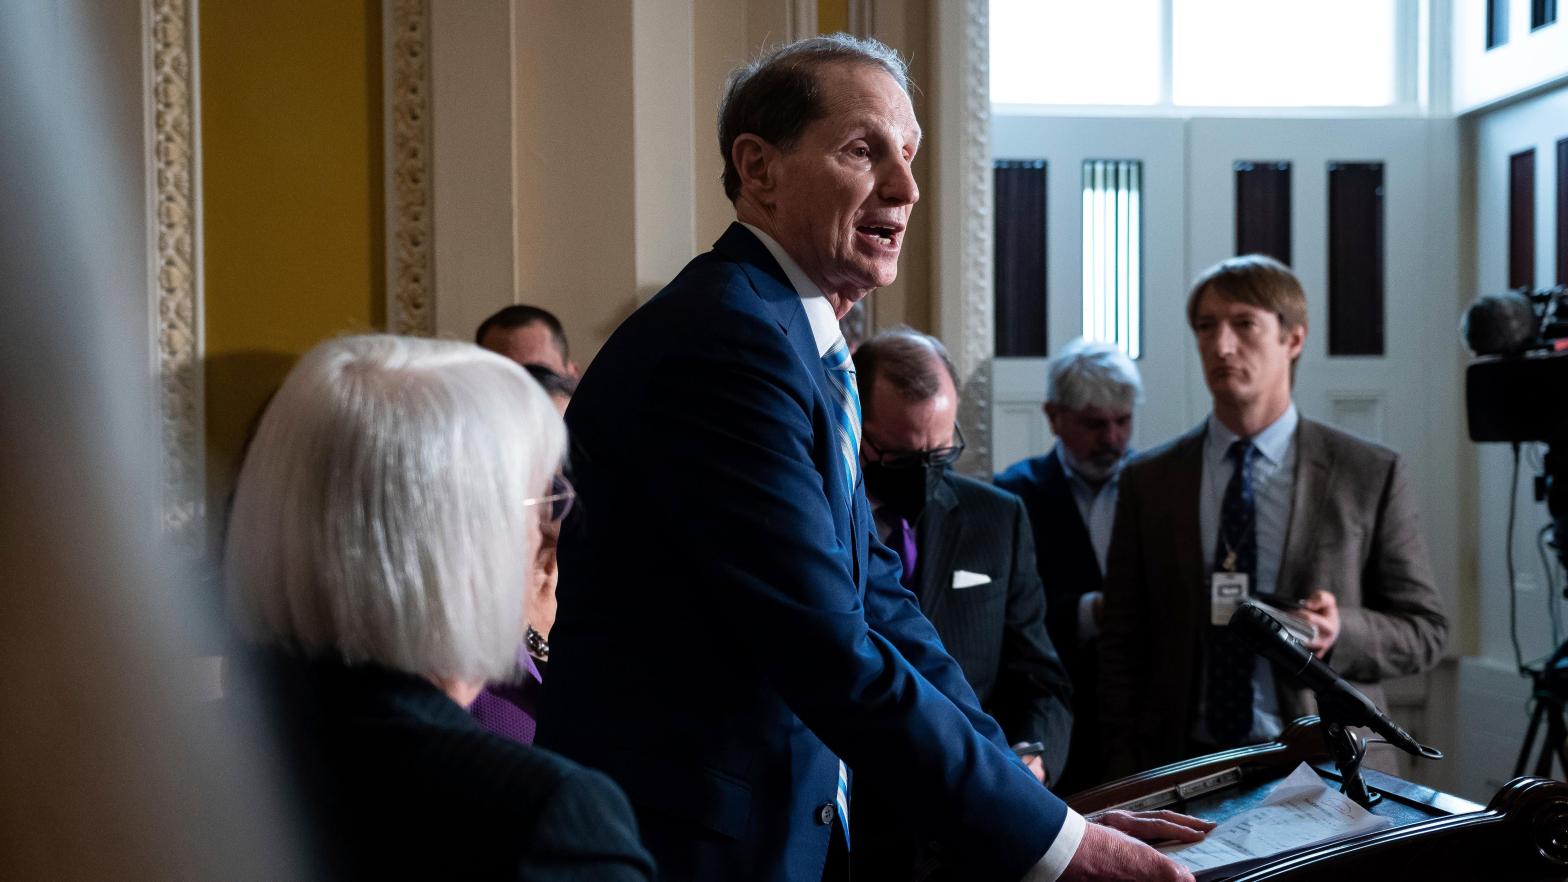 Senator Ron Wyden (D-OR) speaks to media during the weekly Senate Democrat Leadership press conference, at the U.S. Capitol, in Washington, D.C., on Tuesday, September 13, 2022. (Photo: Graeme Sloan, AP)